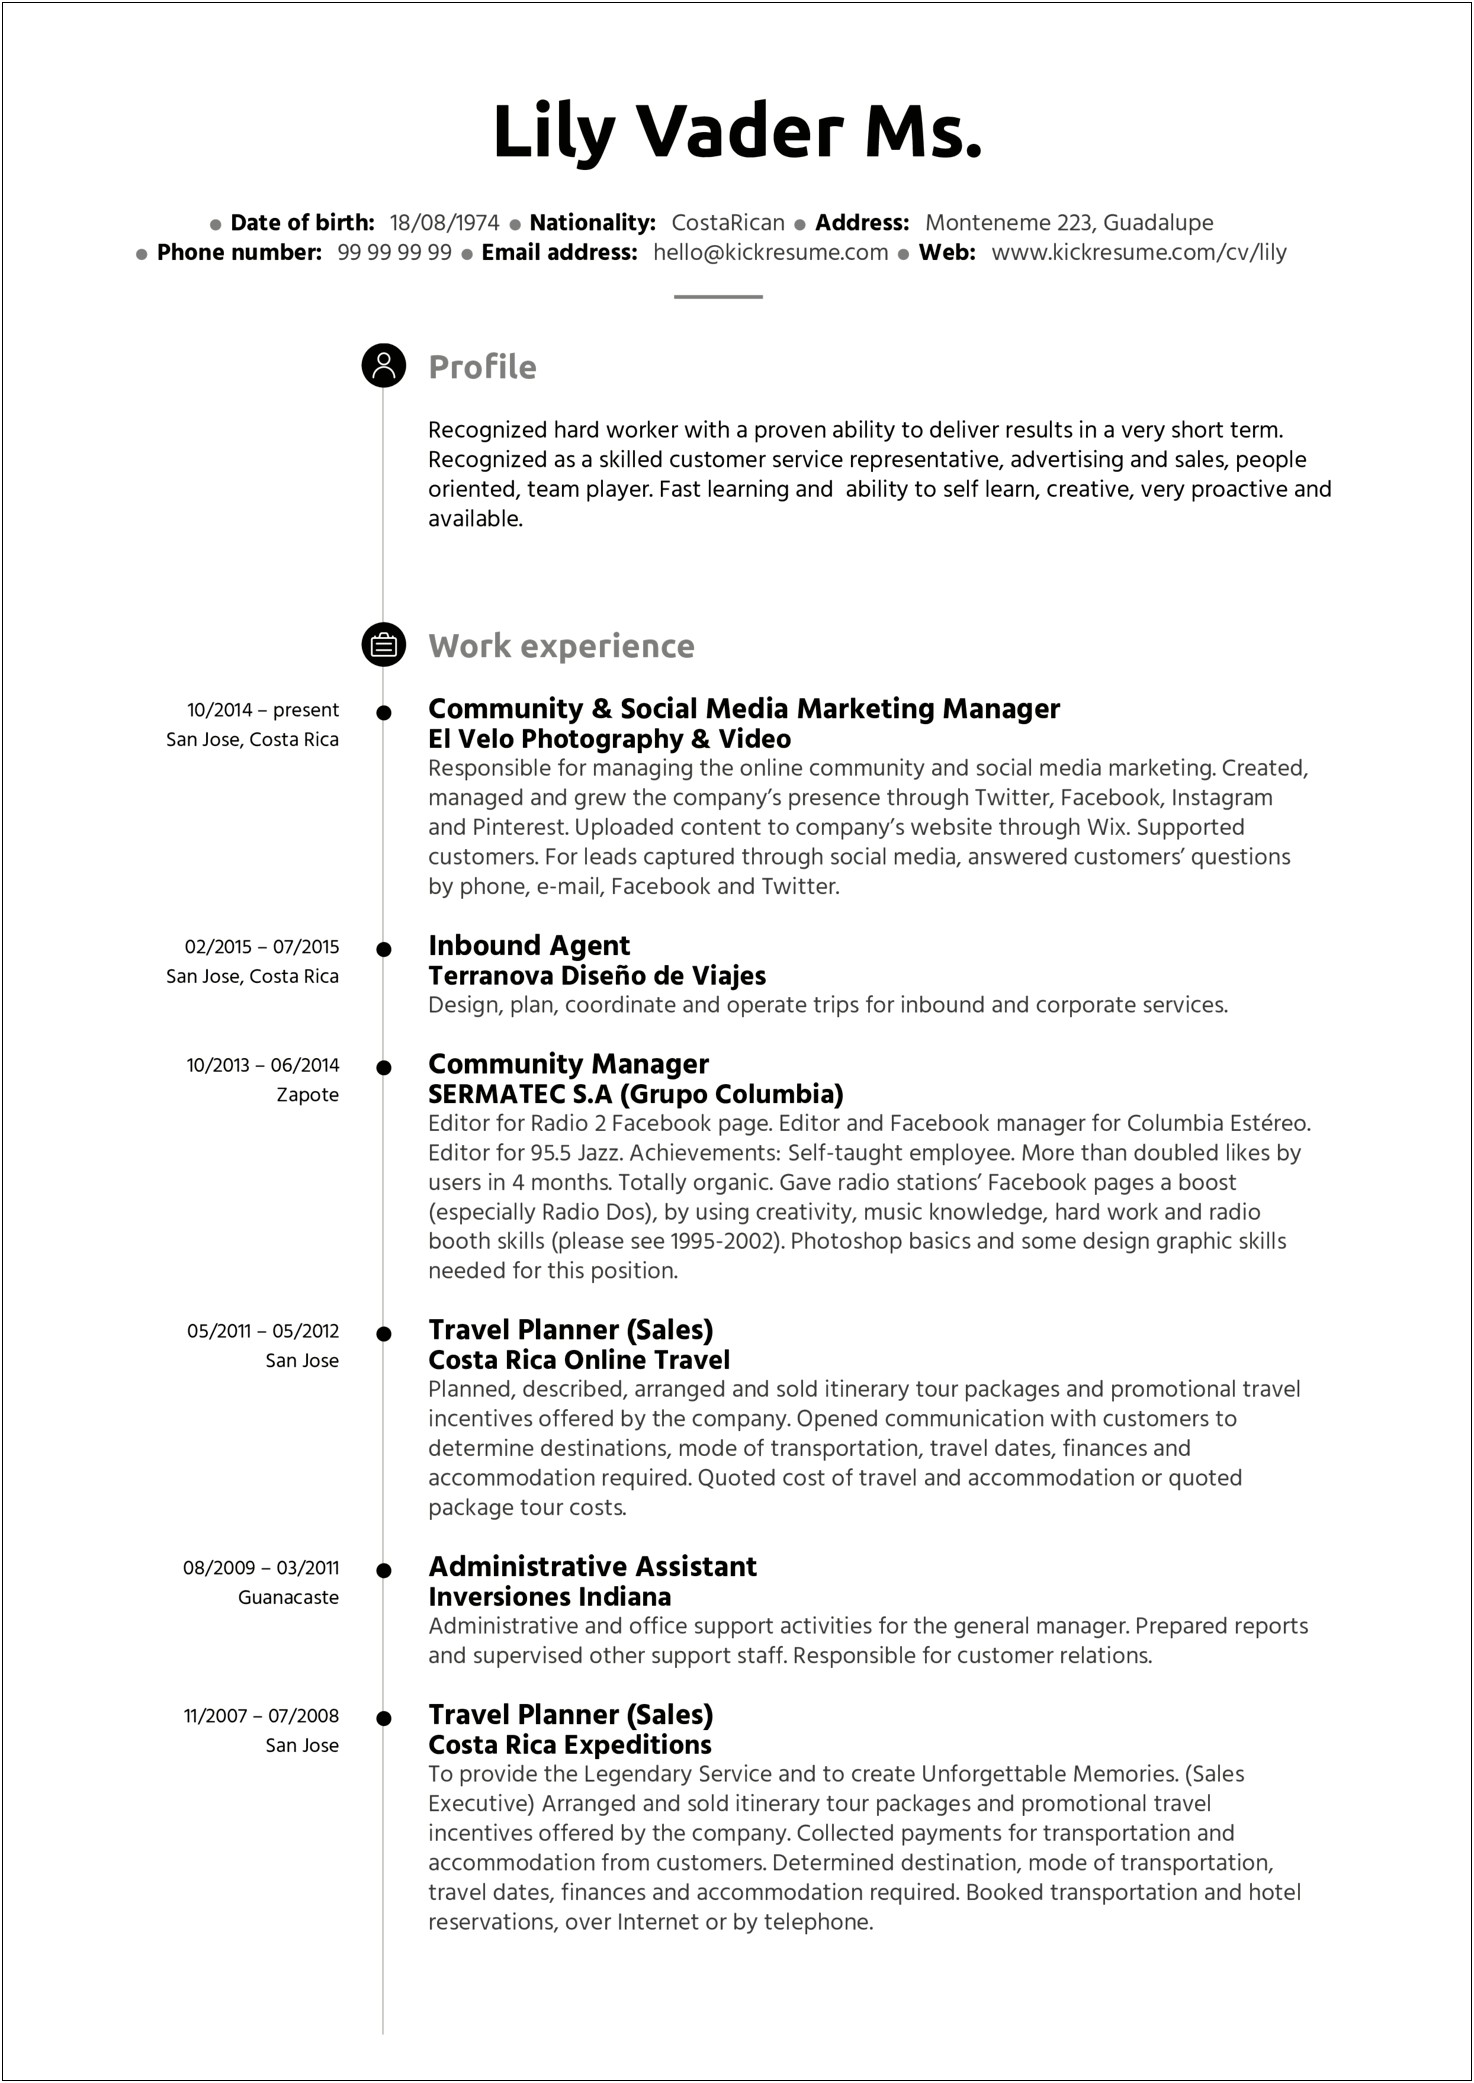 Resume Objective Statement Examples Administrative Assistants